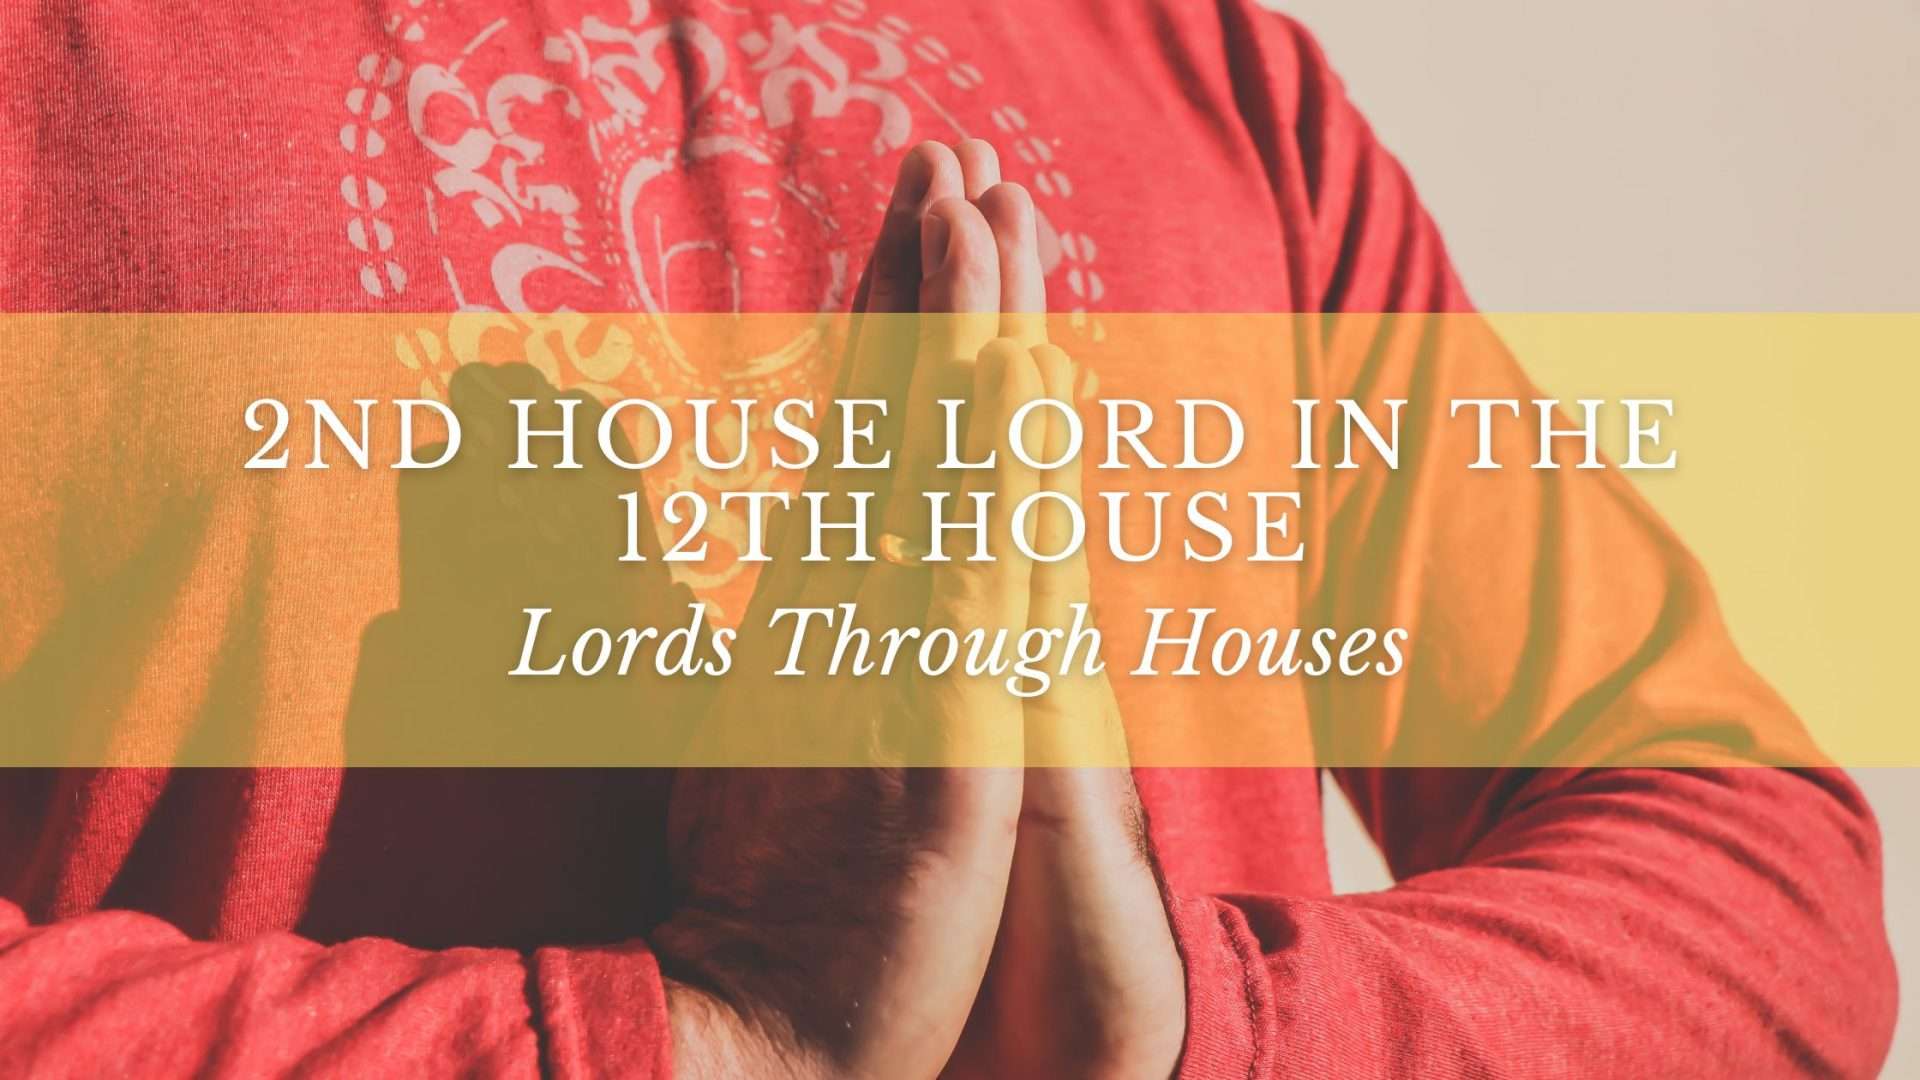 2nd House Lord in the 12th House